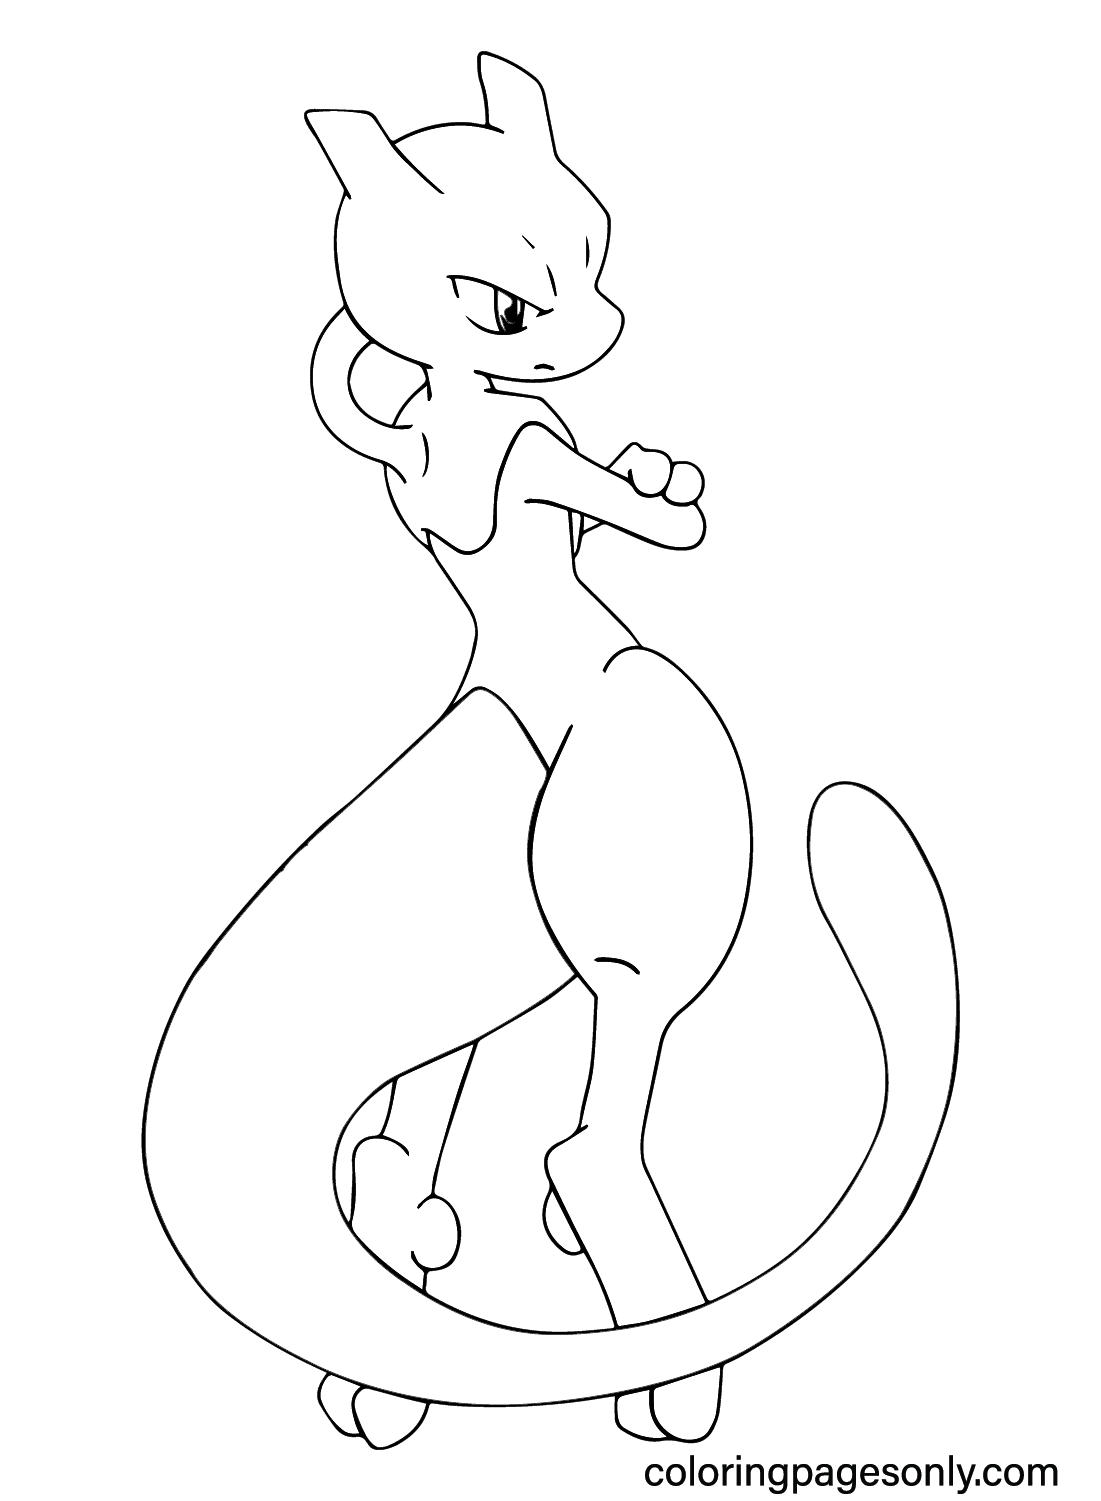 Mewtwo Images to Color from Mewtwo